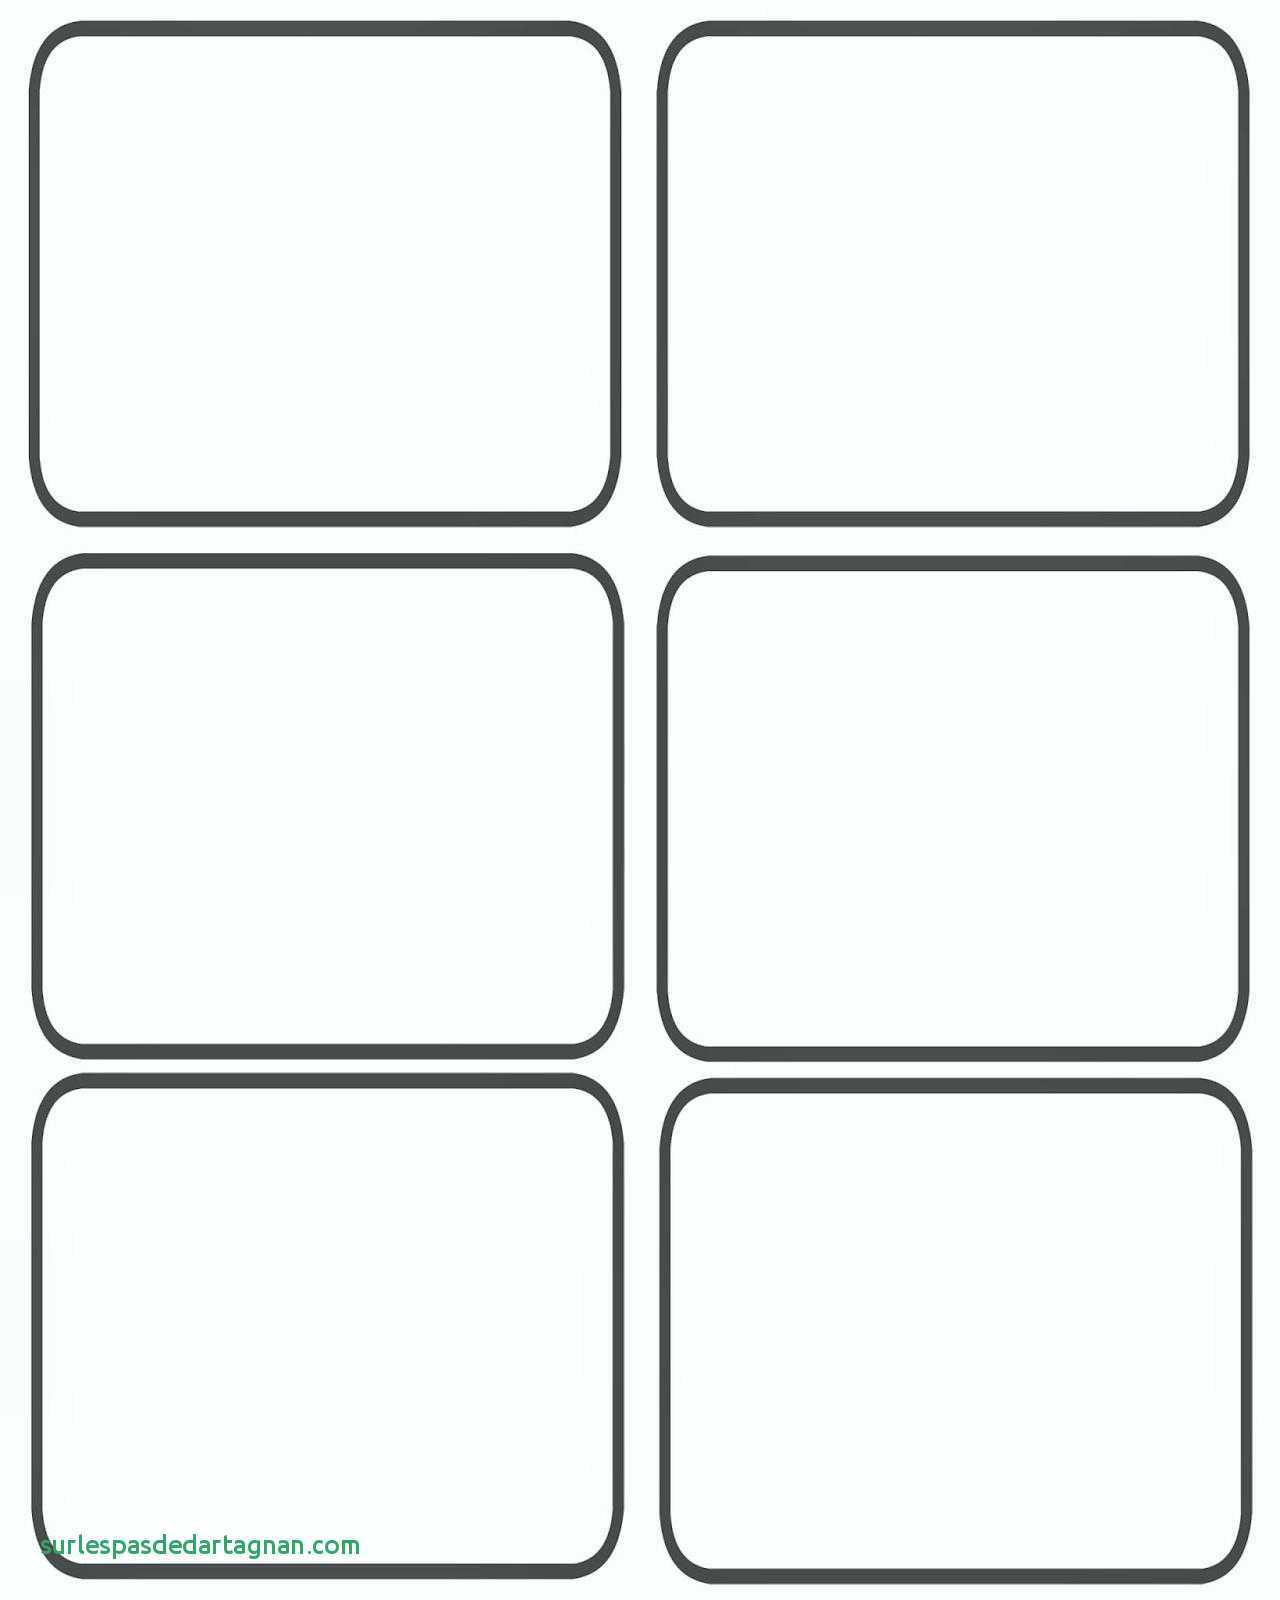 17 Free Printable Playing Cards | Kittybabylove Pertaining To Blank Playing Card Template